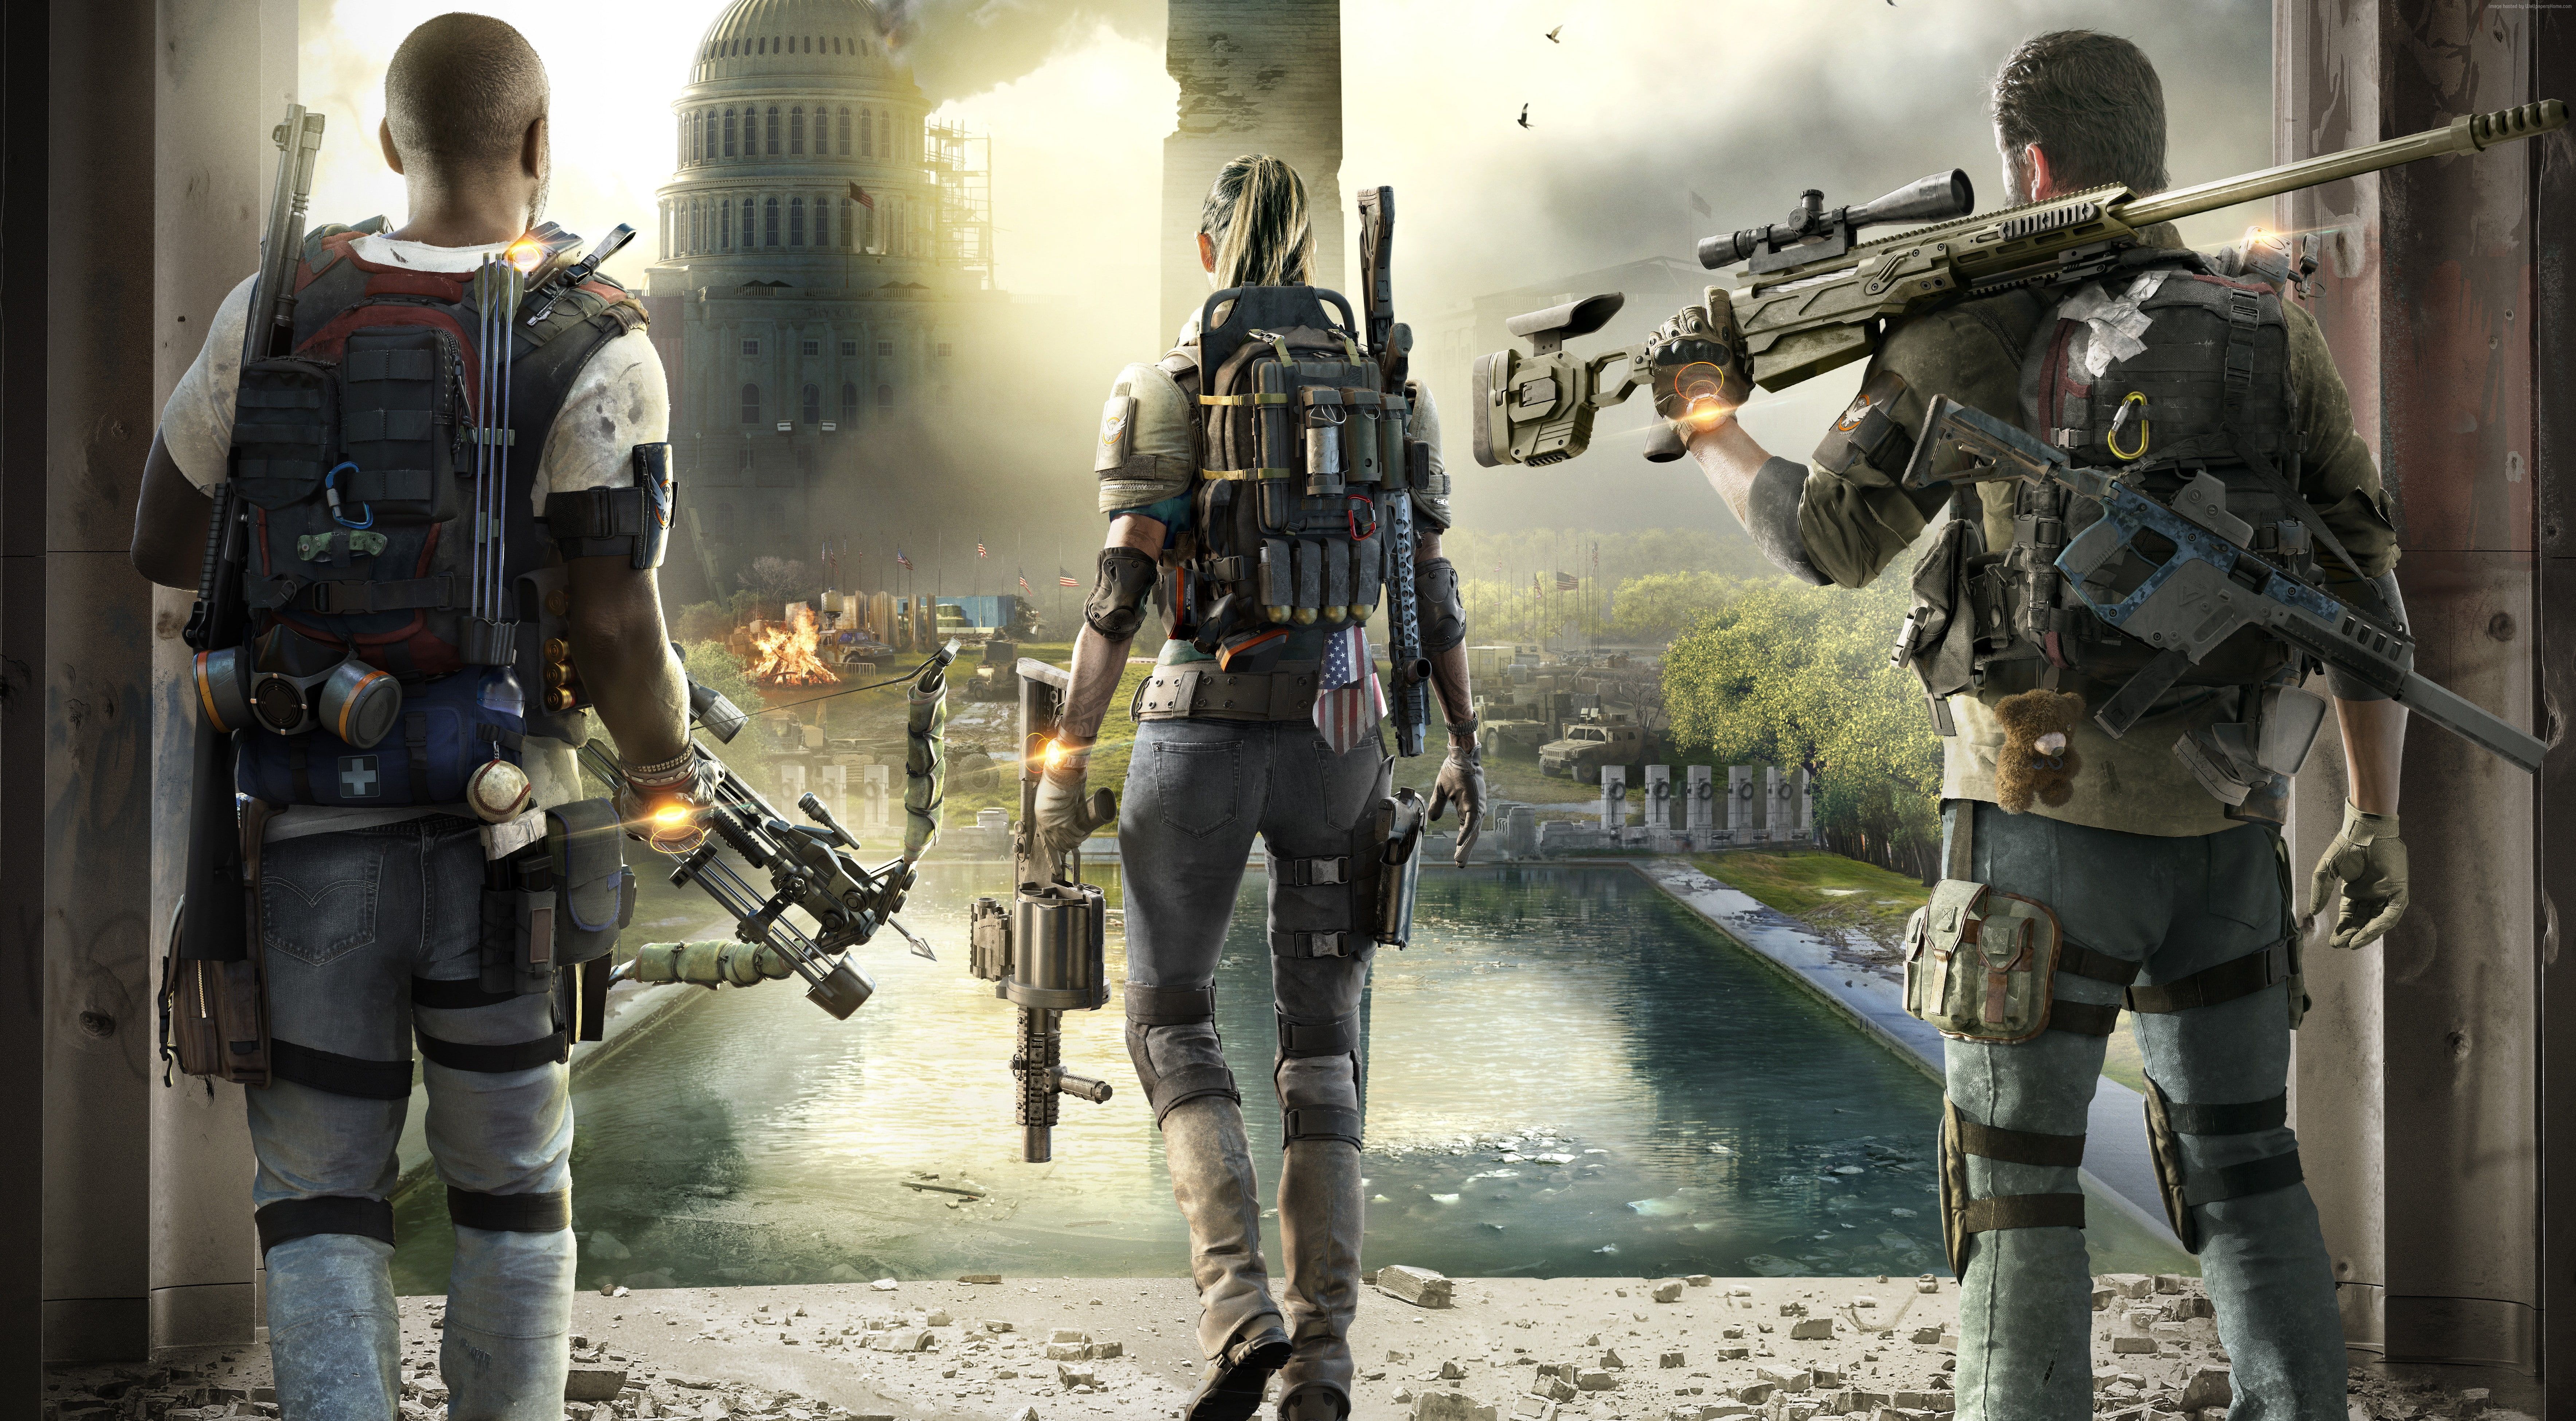 The Division 2 1920X1080 Wallpapers